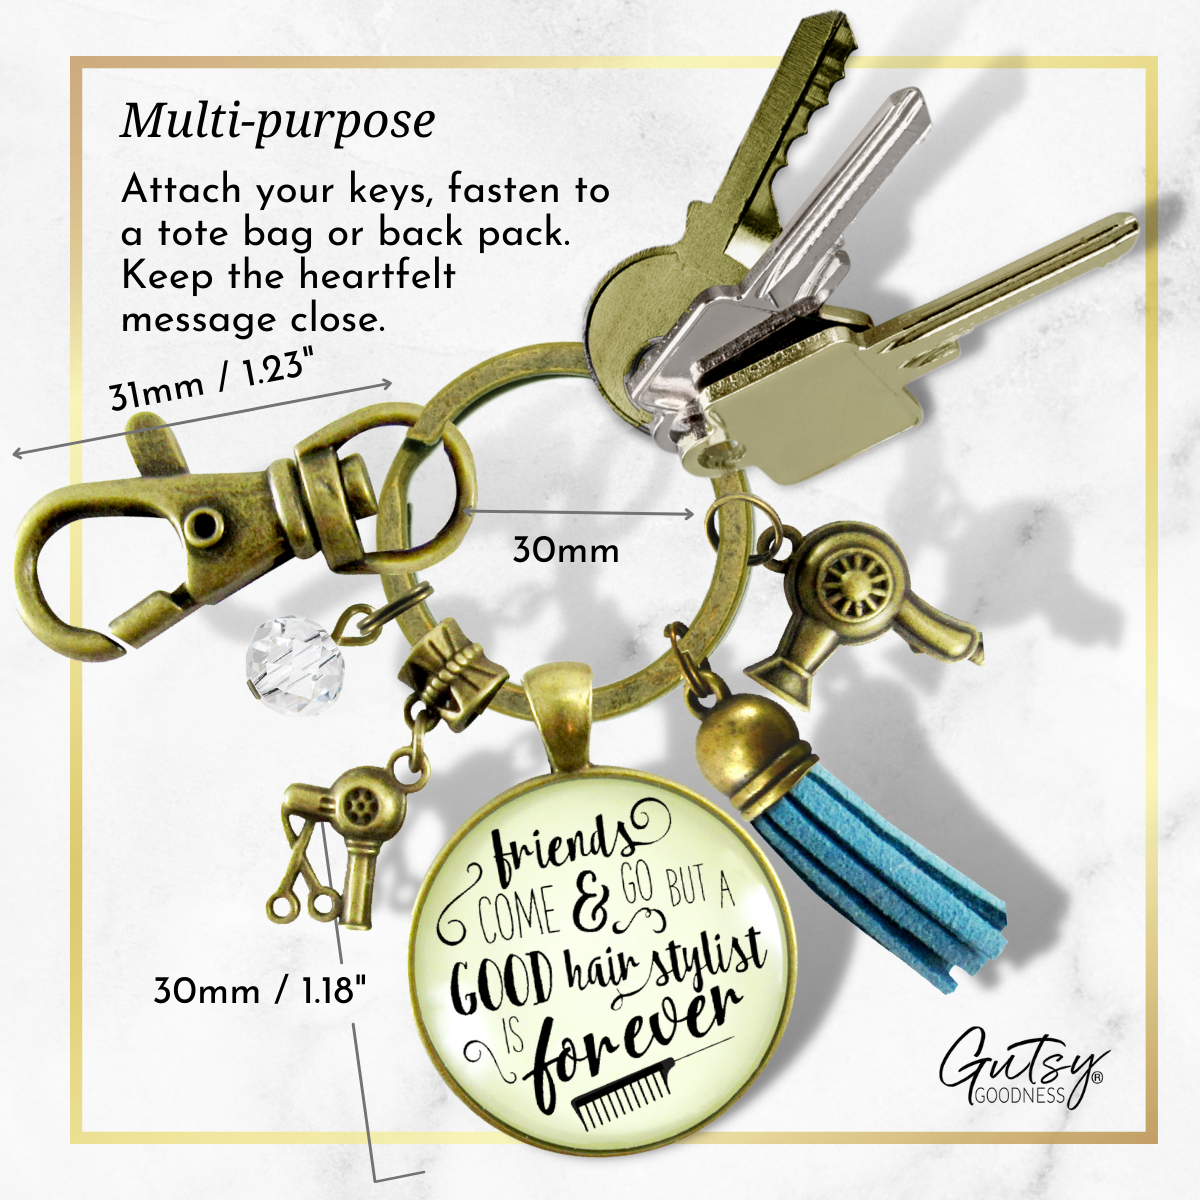 Hair Stylist Keychain Friends Come Go Hair Stylist Forever Beautician Glam Quote Jewelry Tassel - Gutsy Goodness Handmade Jewelry;Hair Stylist Keychain Friends Come Go Hair Stylist Forever Beautician Glam Quote Jewelry Tassel - Gutsy Goodness Handmade Jewelry Gifts